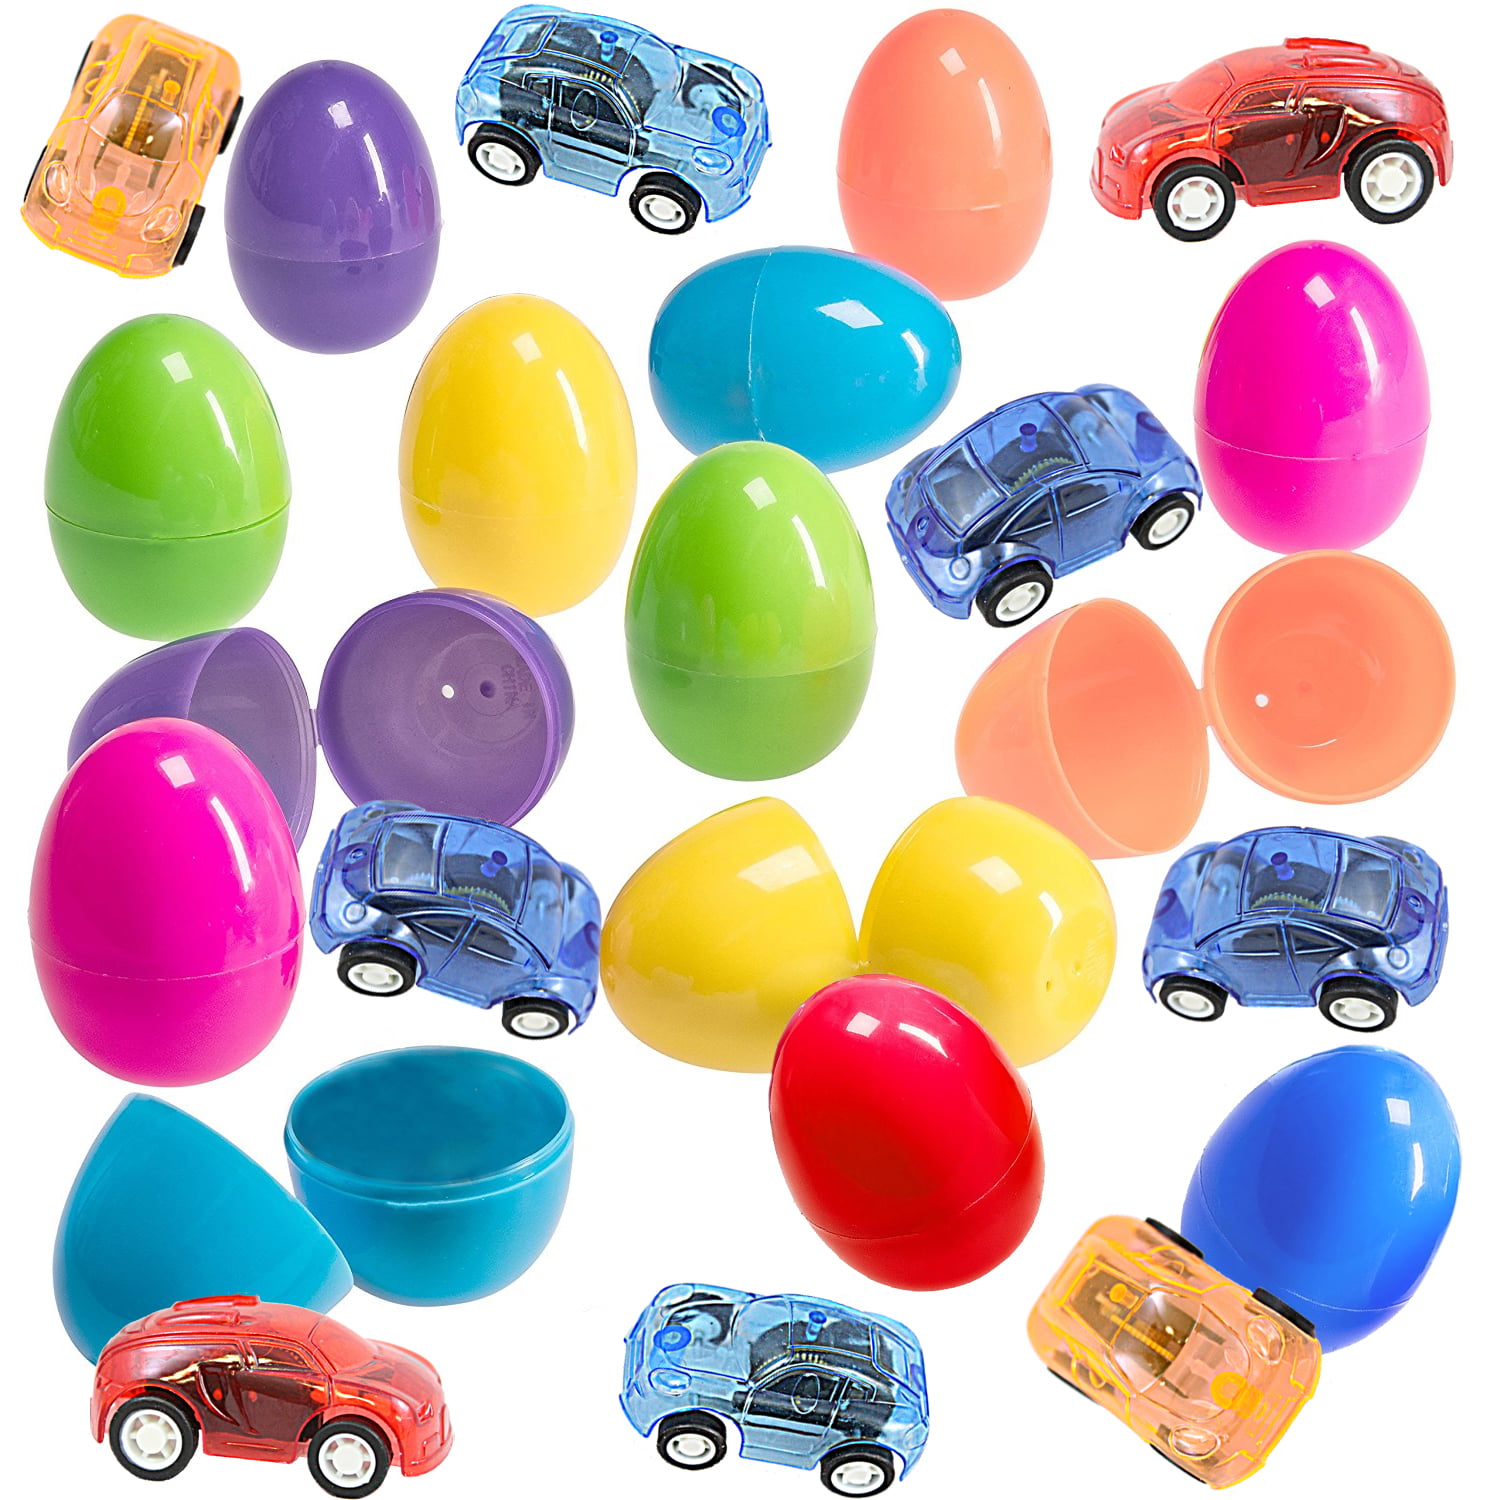 12 Toy Filled Easter Eggs With Miniature Wind-Up Car Toys, Assorted